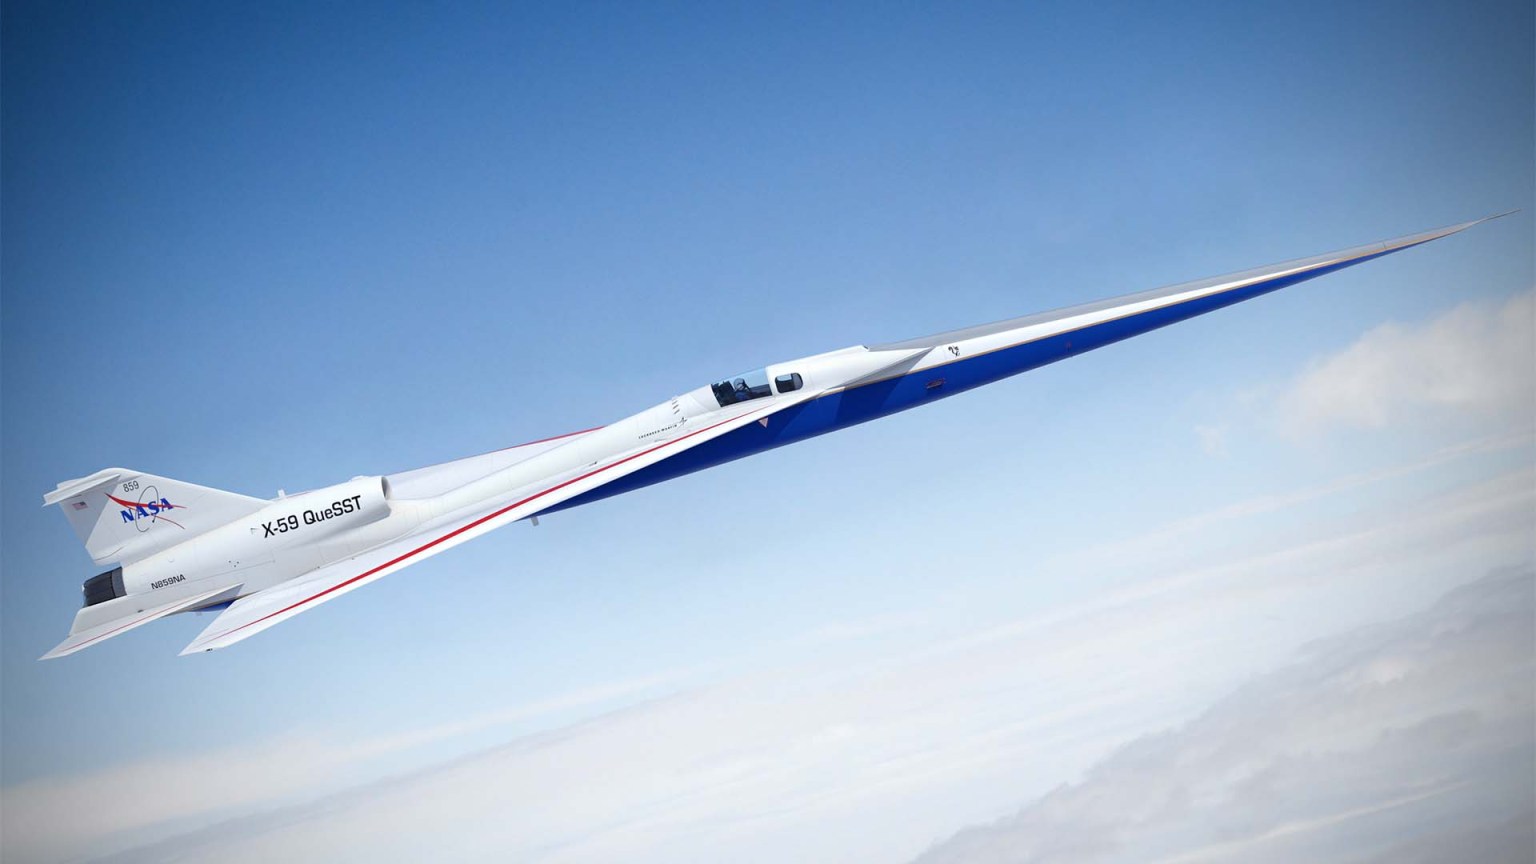 Artist illustration of the X-59 Quiet SuperSonic Technology aircraft, which will soon take skies as NASA’s first purpose-built, supersonic experimental plane in decades.